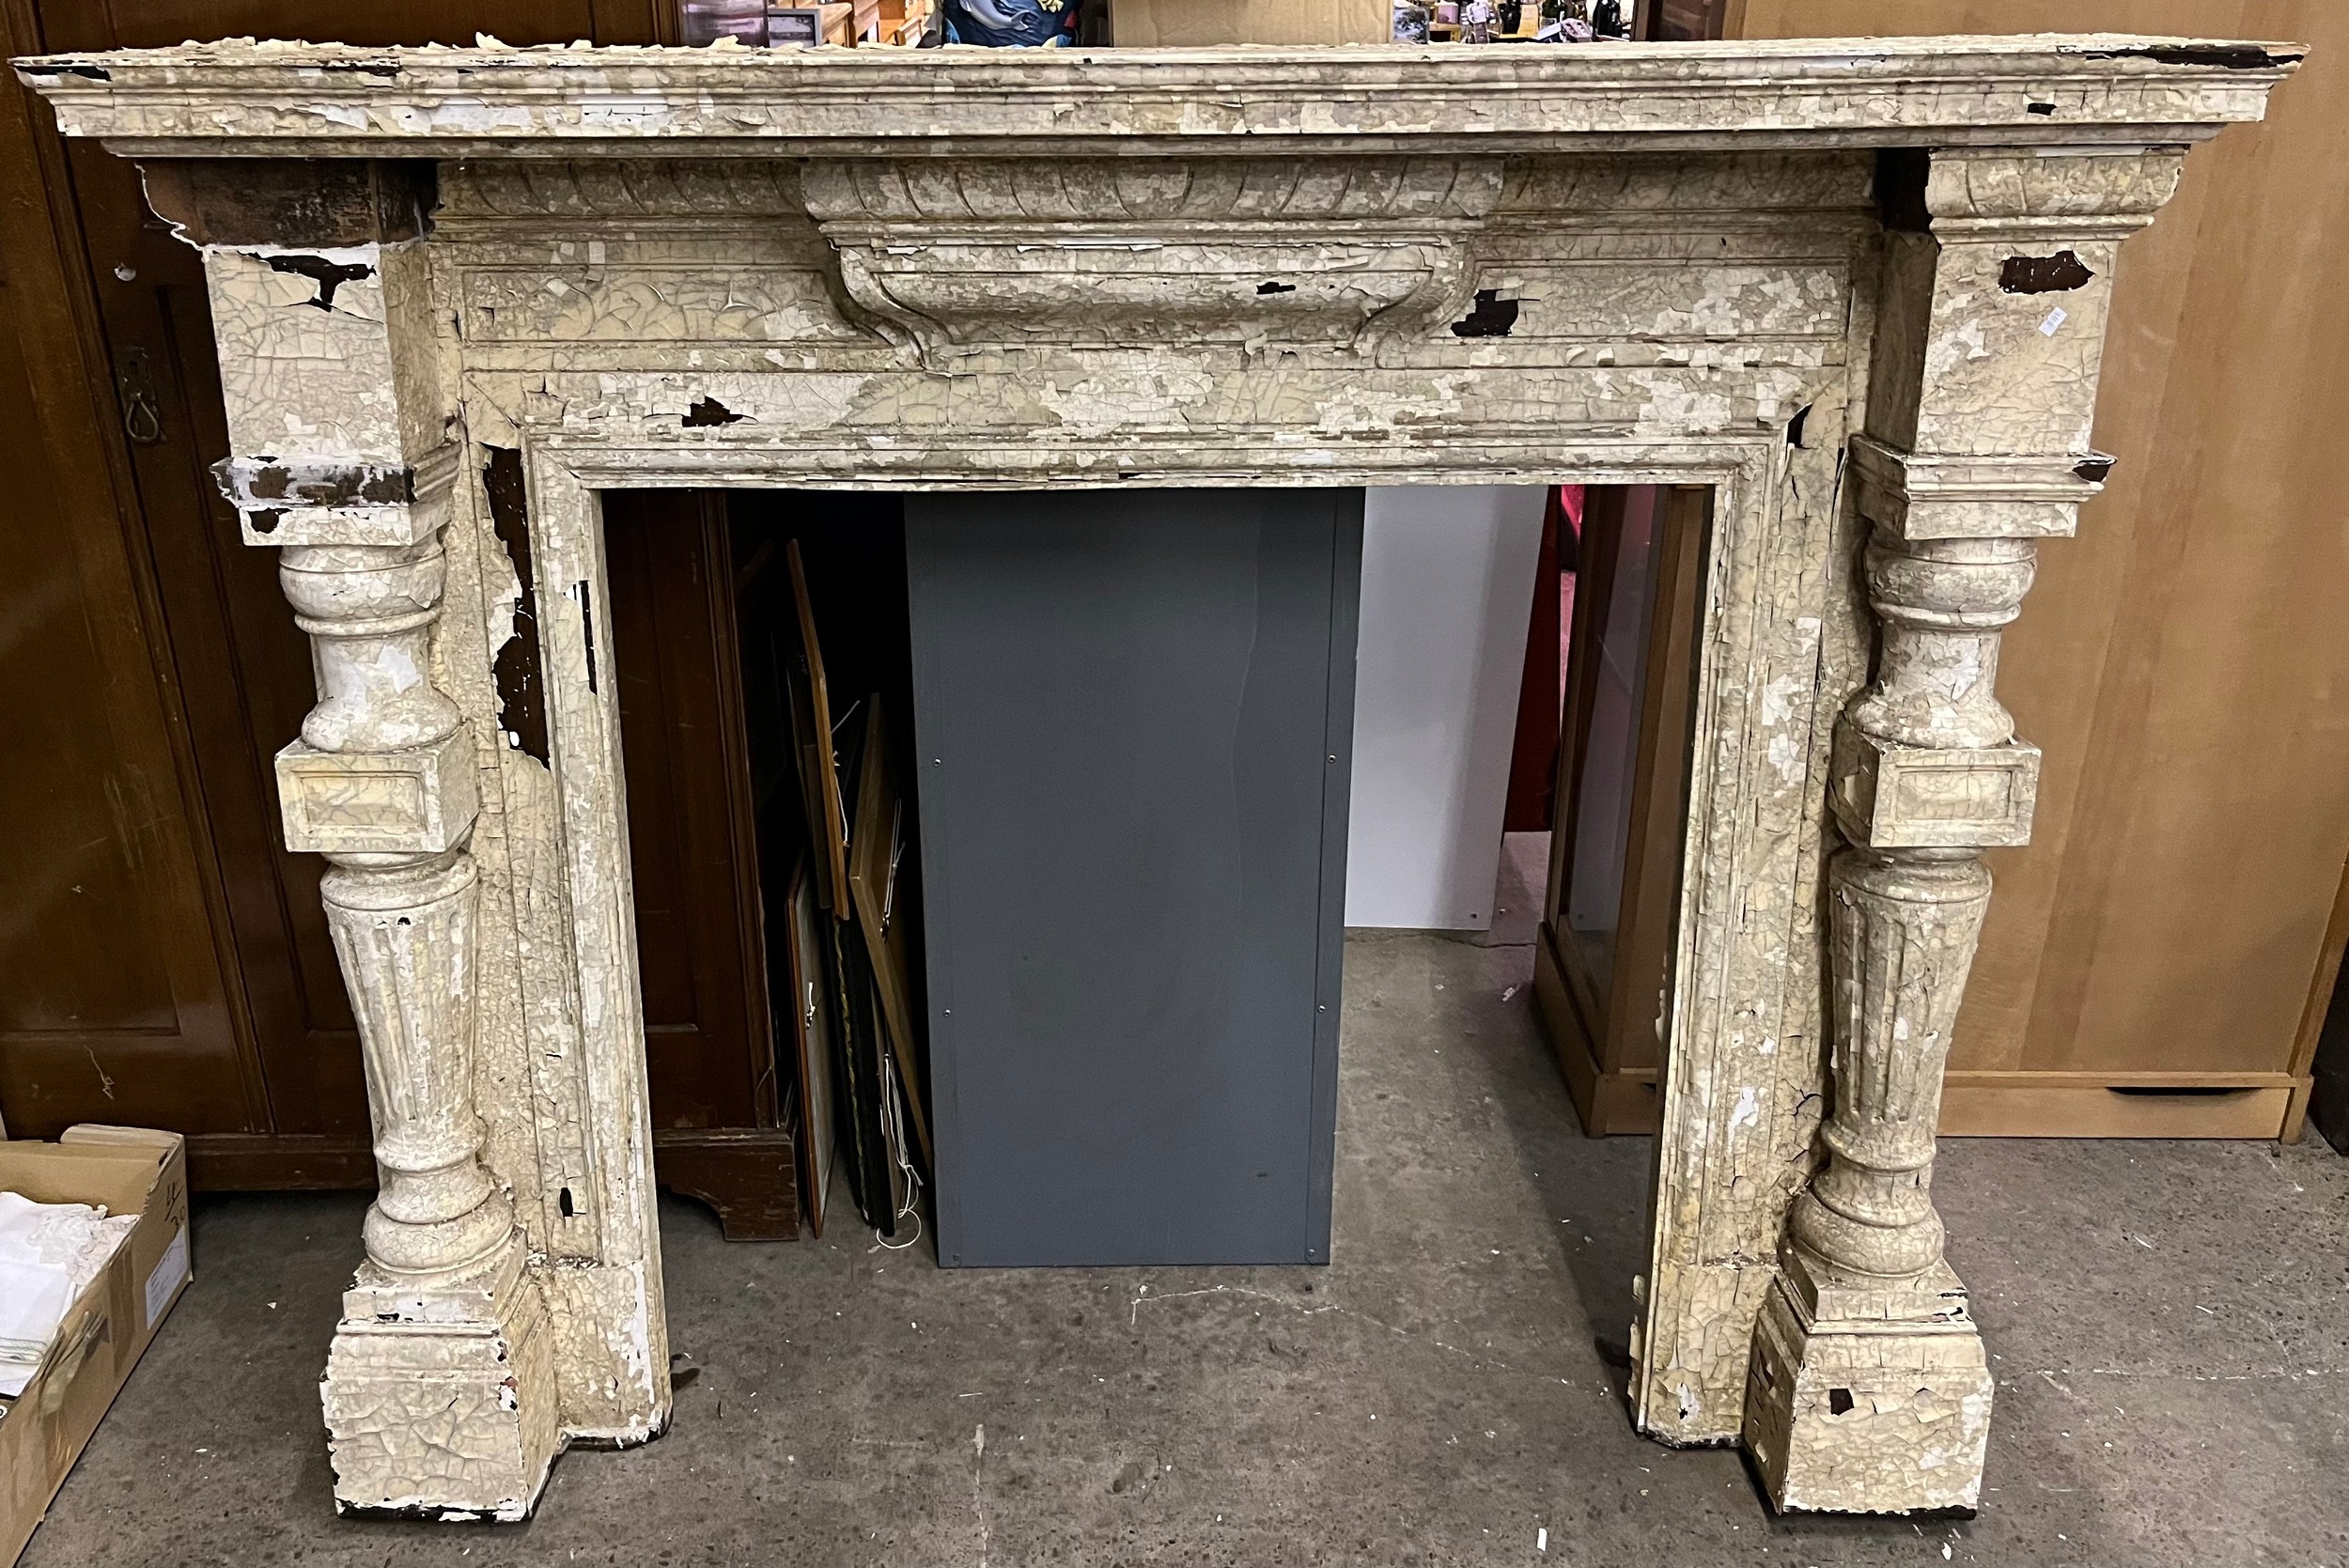 19th century solid wood [possibly Mahogany] fire surround.